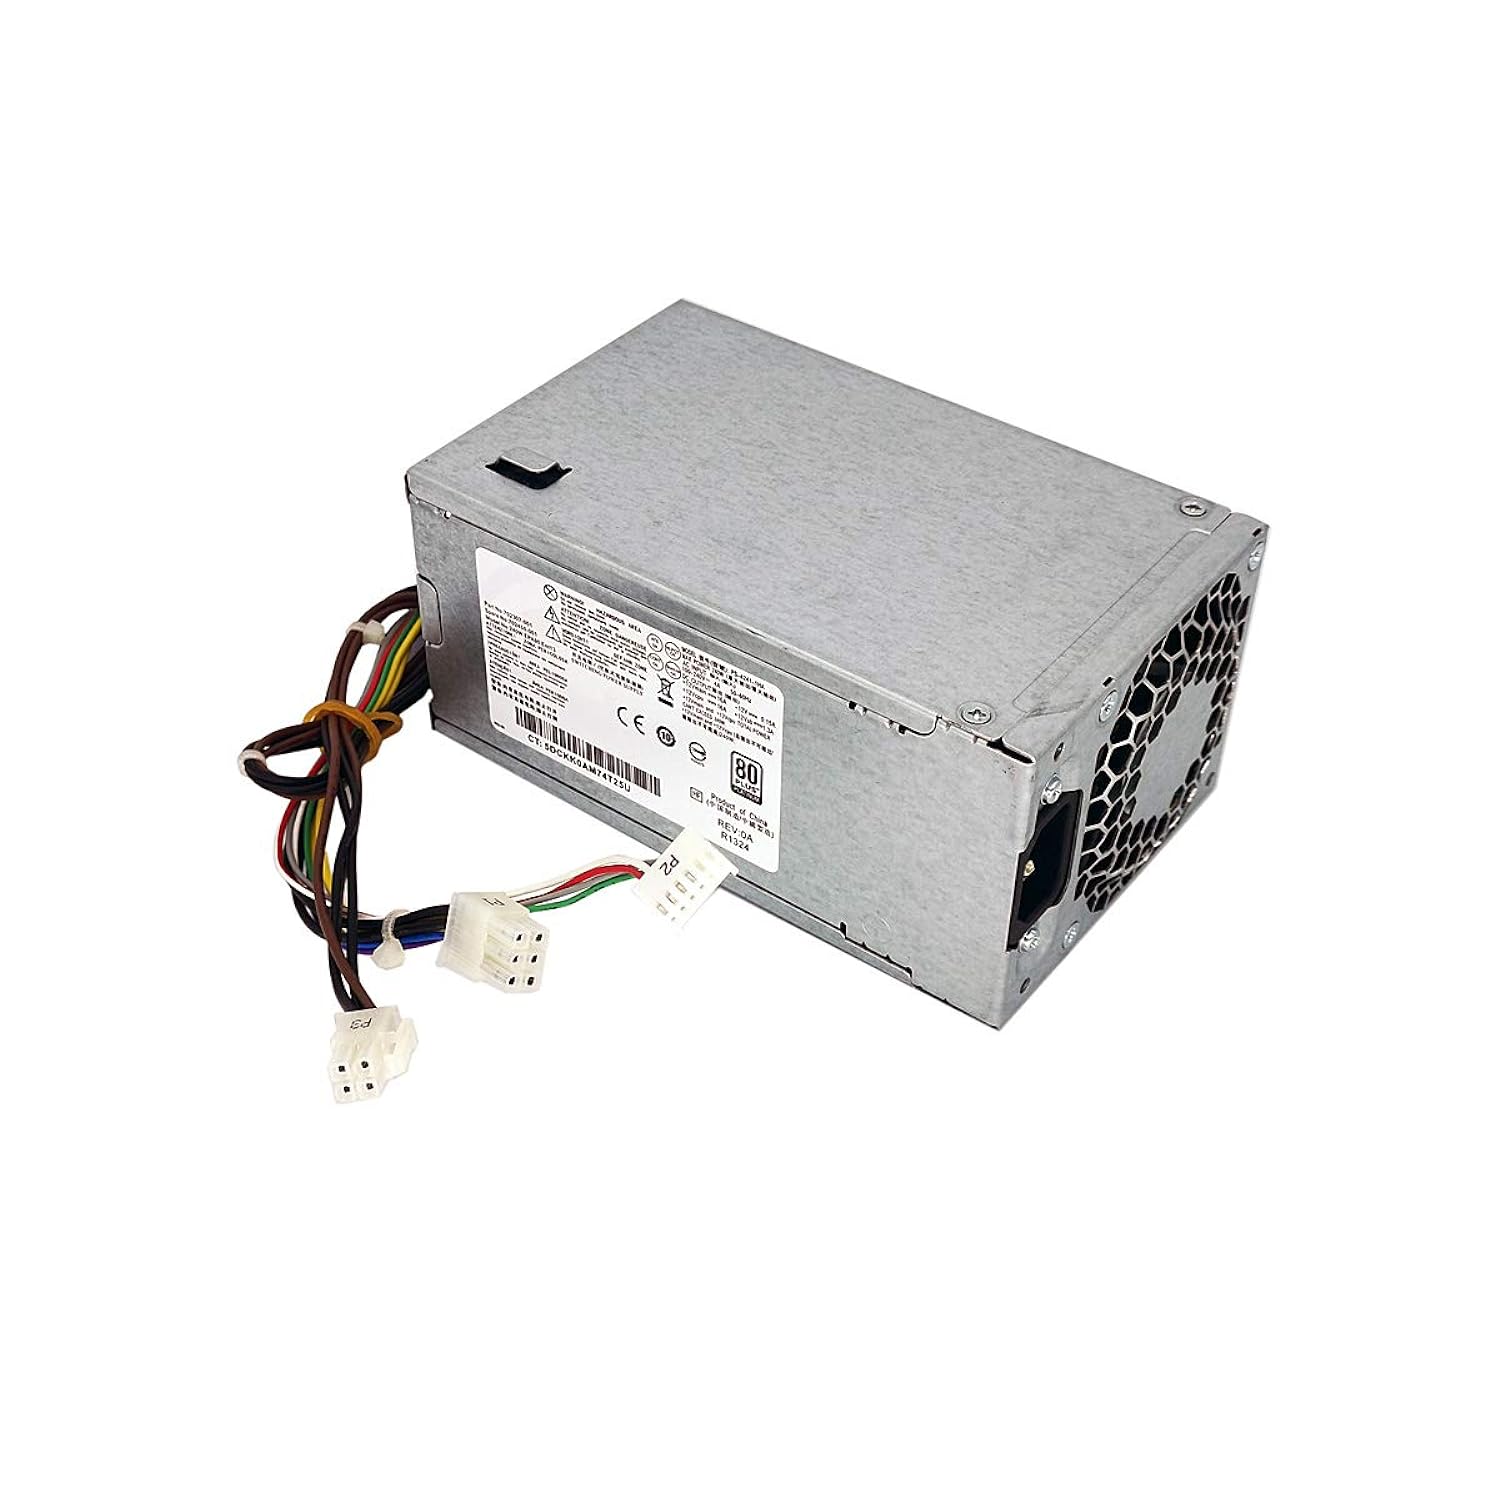 GCP Products 240W Ps-4241-1Ha 702307-001 702455-001 Power Supply For Hp Prodesk 400 600 800 G1 G2 Sff,P/N: 751884-001, 702309-001, 751886-…